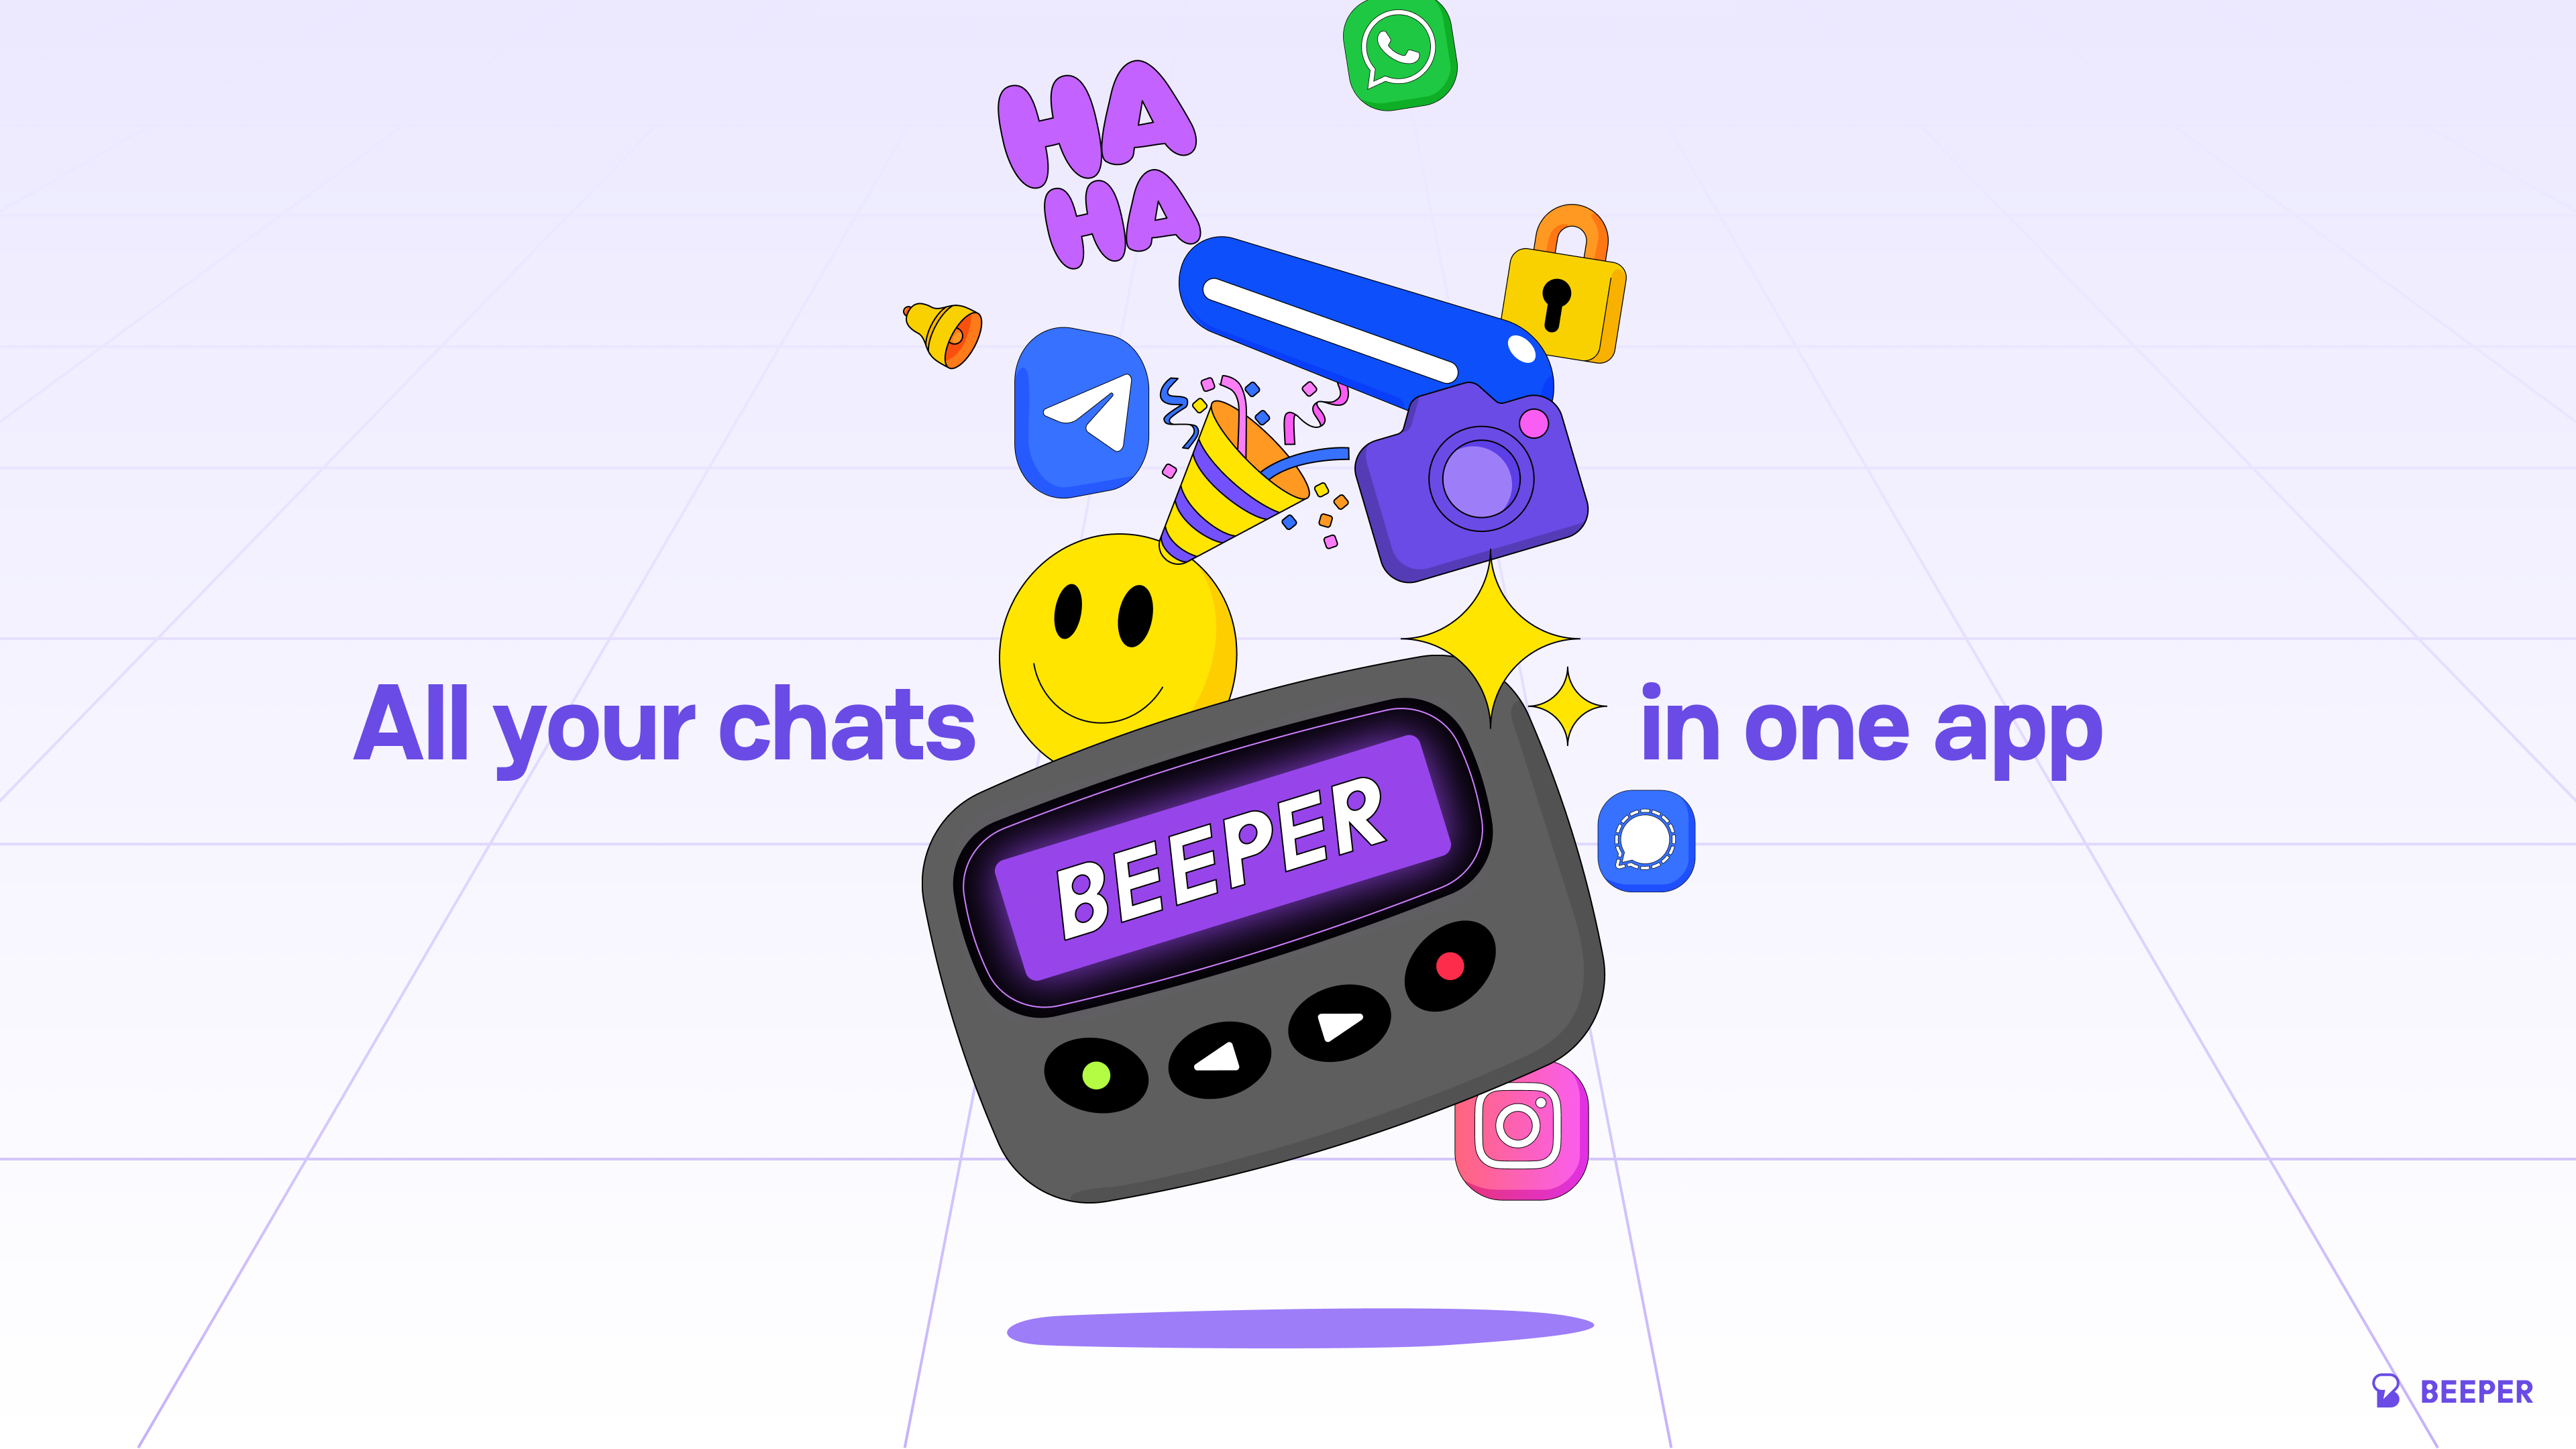 Beeper graphic that reads "All your chats in one app"